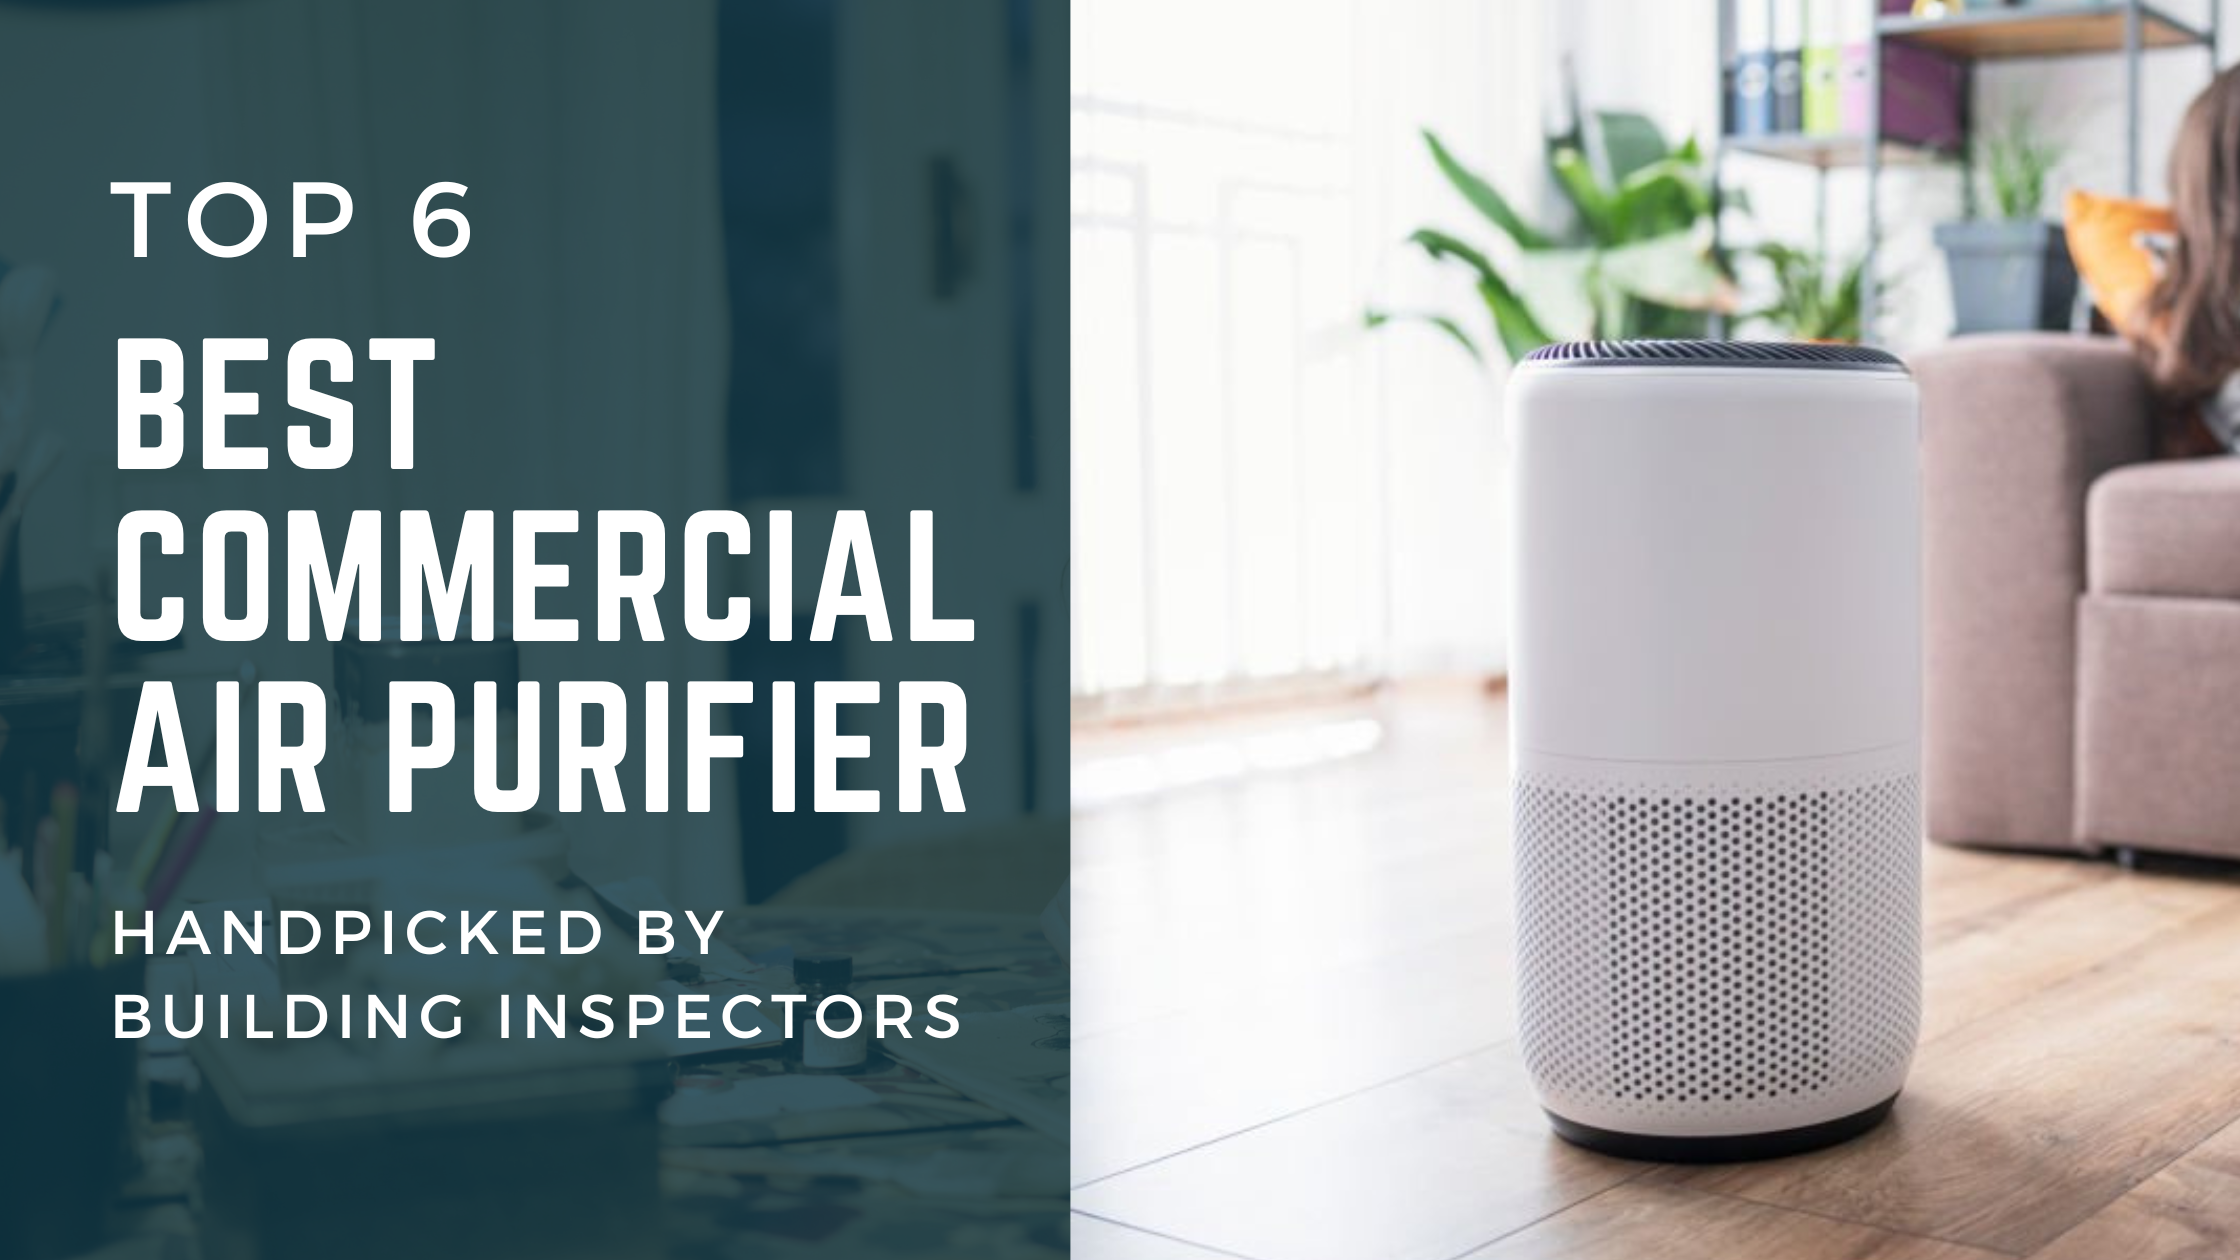 You are currently viewing Top 6 Best Commercial Air Purifier(s) handpicked by Building Inspectors